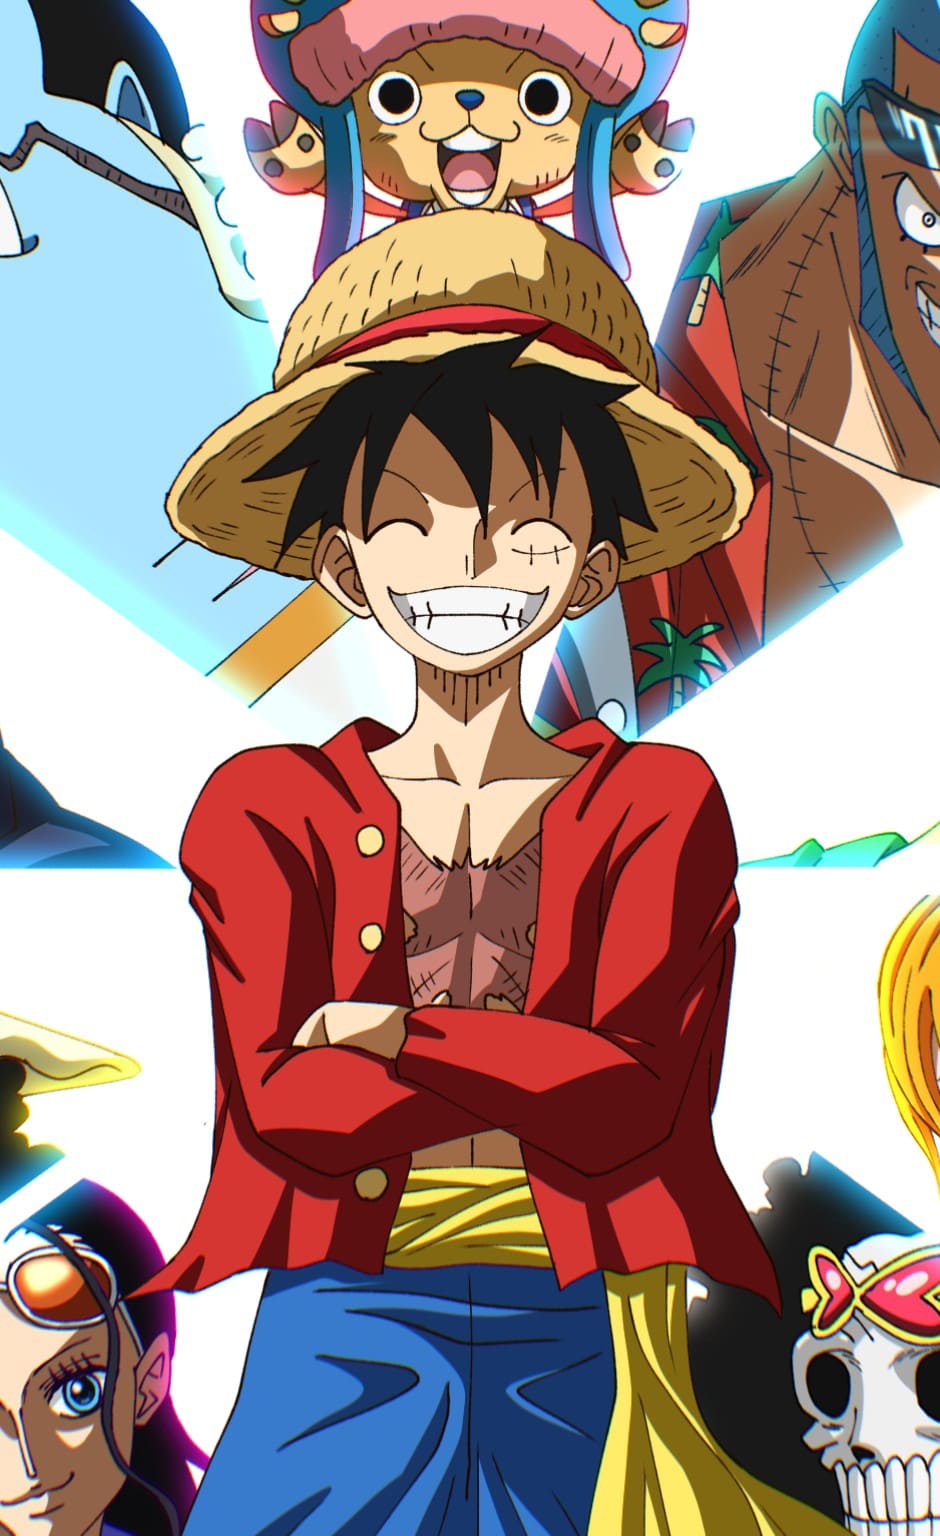 Unique One Piece Wallpaper Phone Hd | One piece new world, Anime, Hd anime  wallpapers